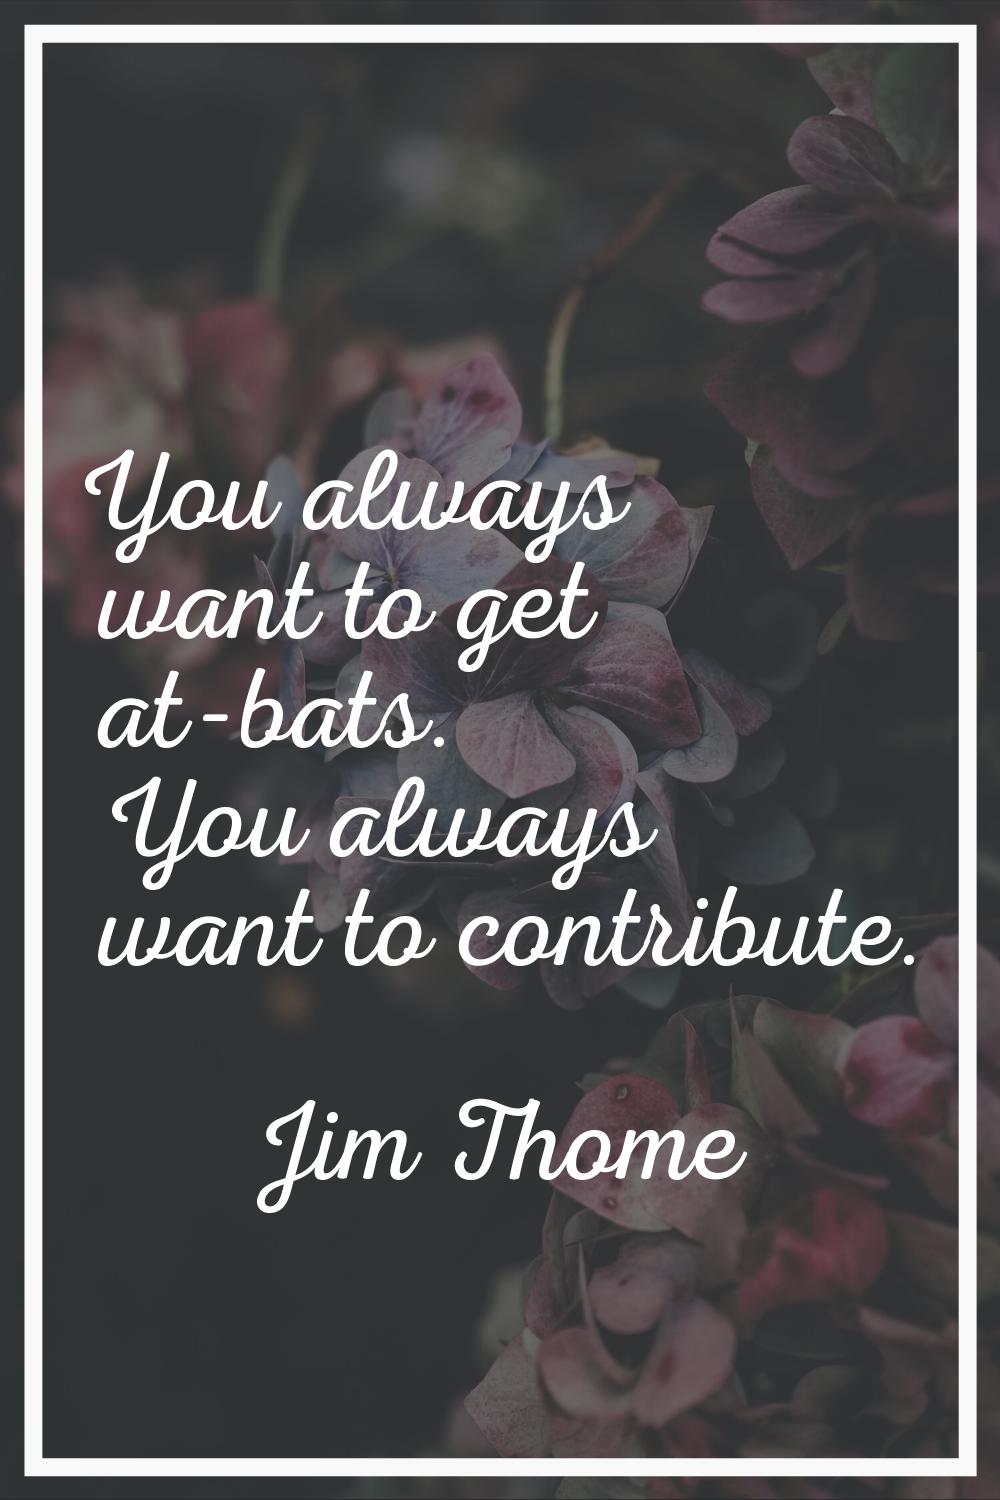 You always want to get at-bats. You always want to contribute.